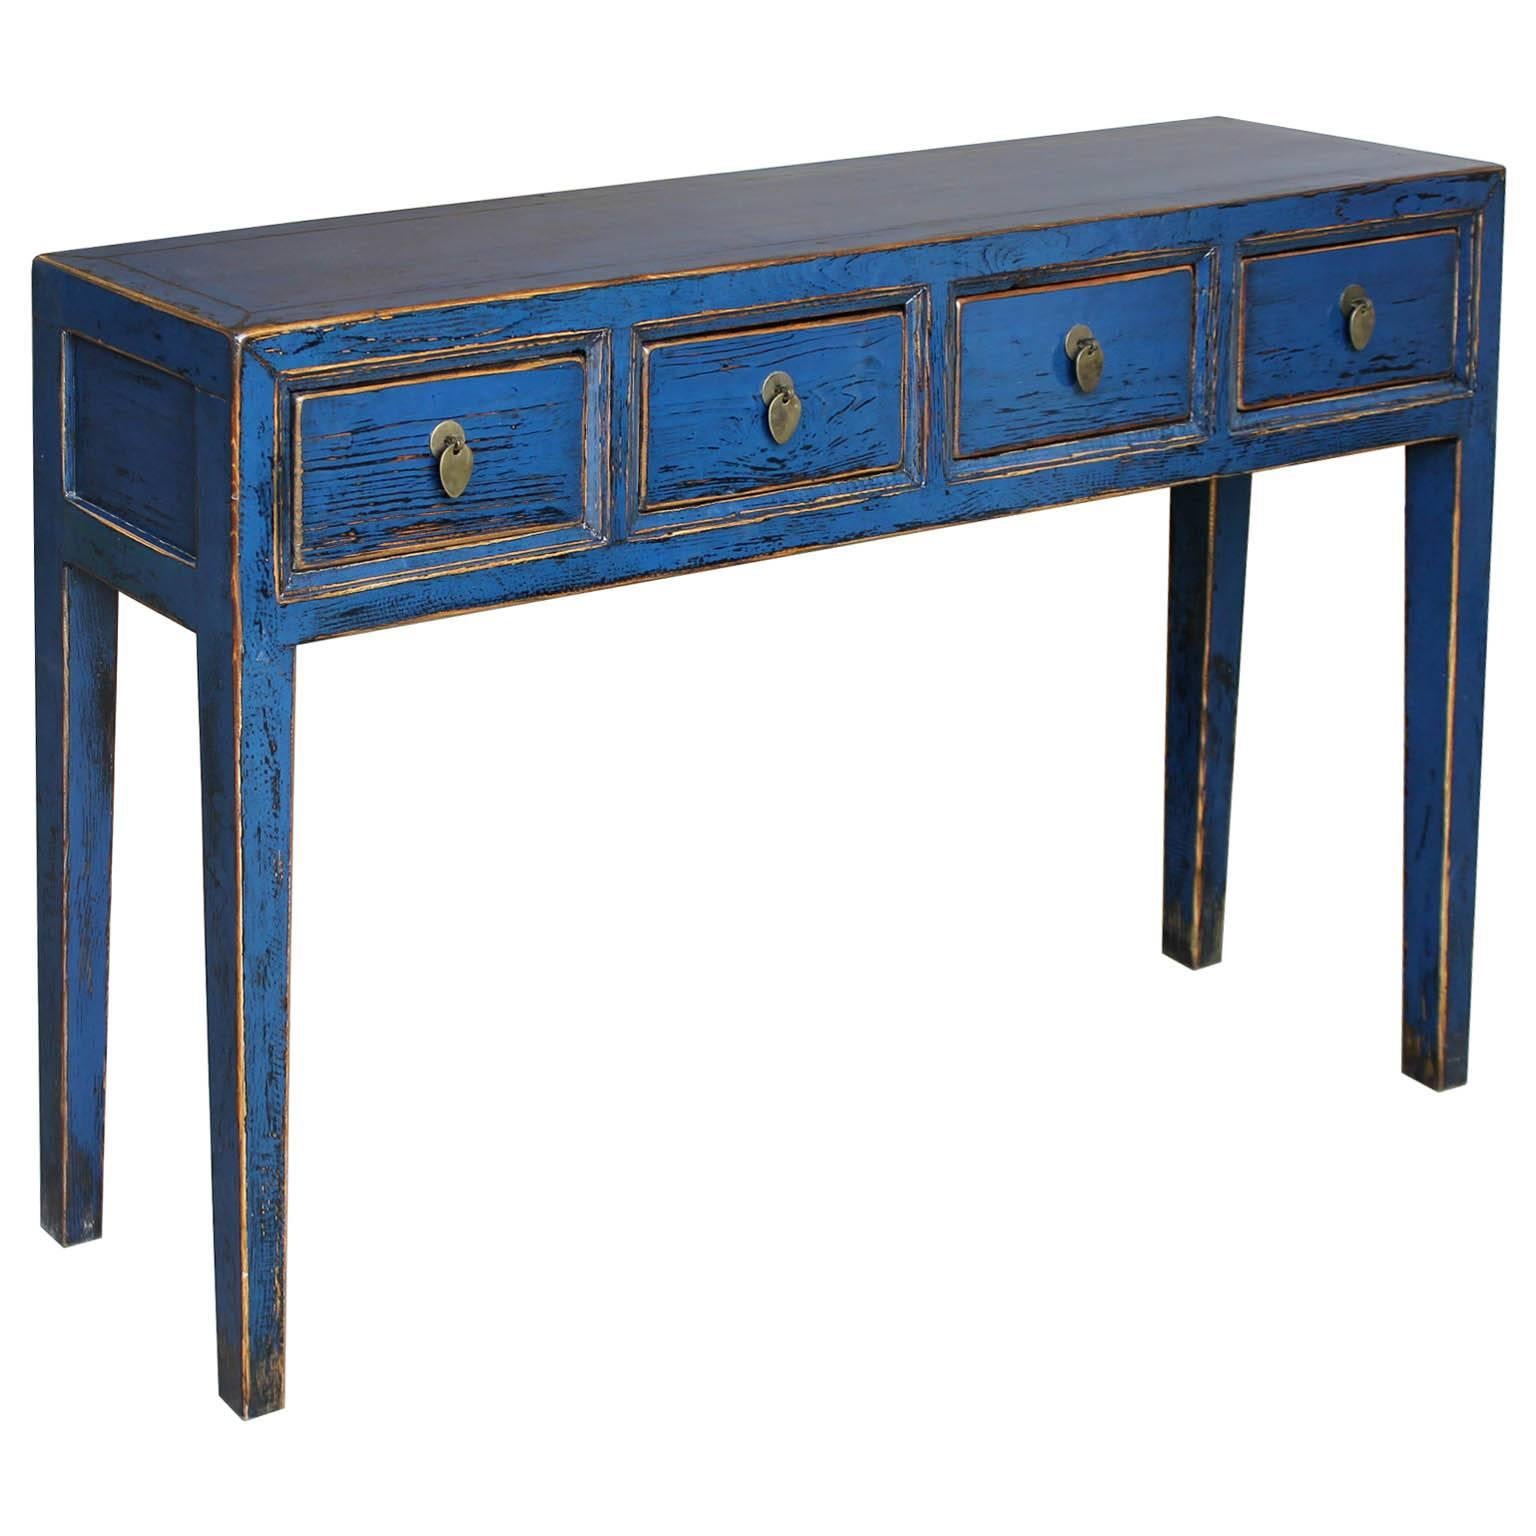 Vibrant blue four-drawer console table with exposed wood edges and clean lines is a statement piece in a contemporary home.  Bring color into your living room by placing this console against a wall or behind a sofa.